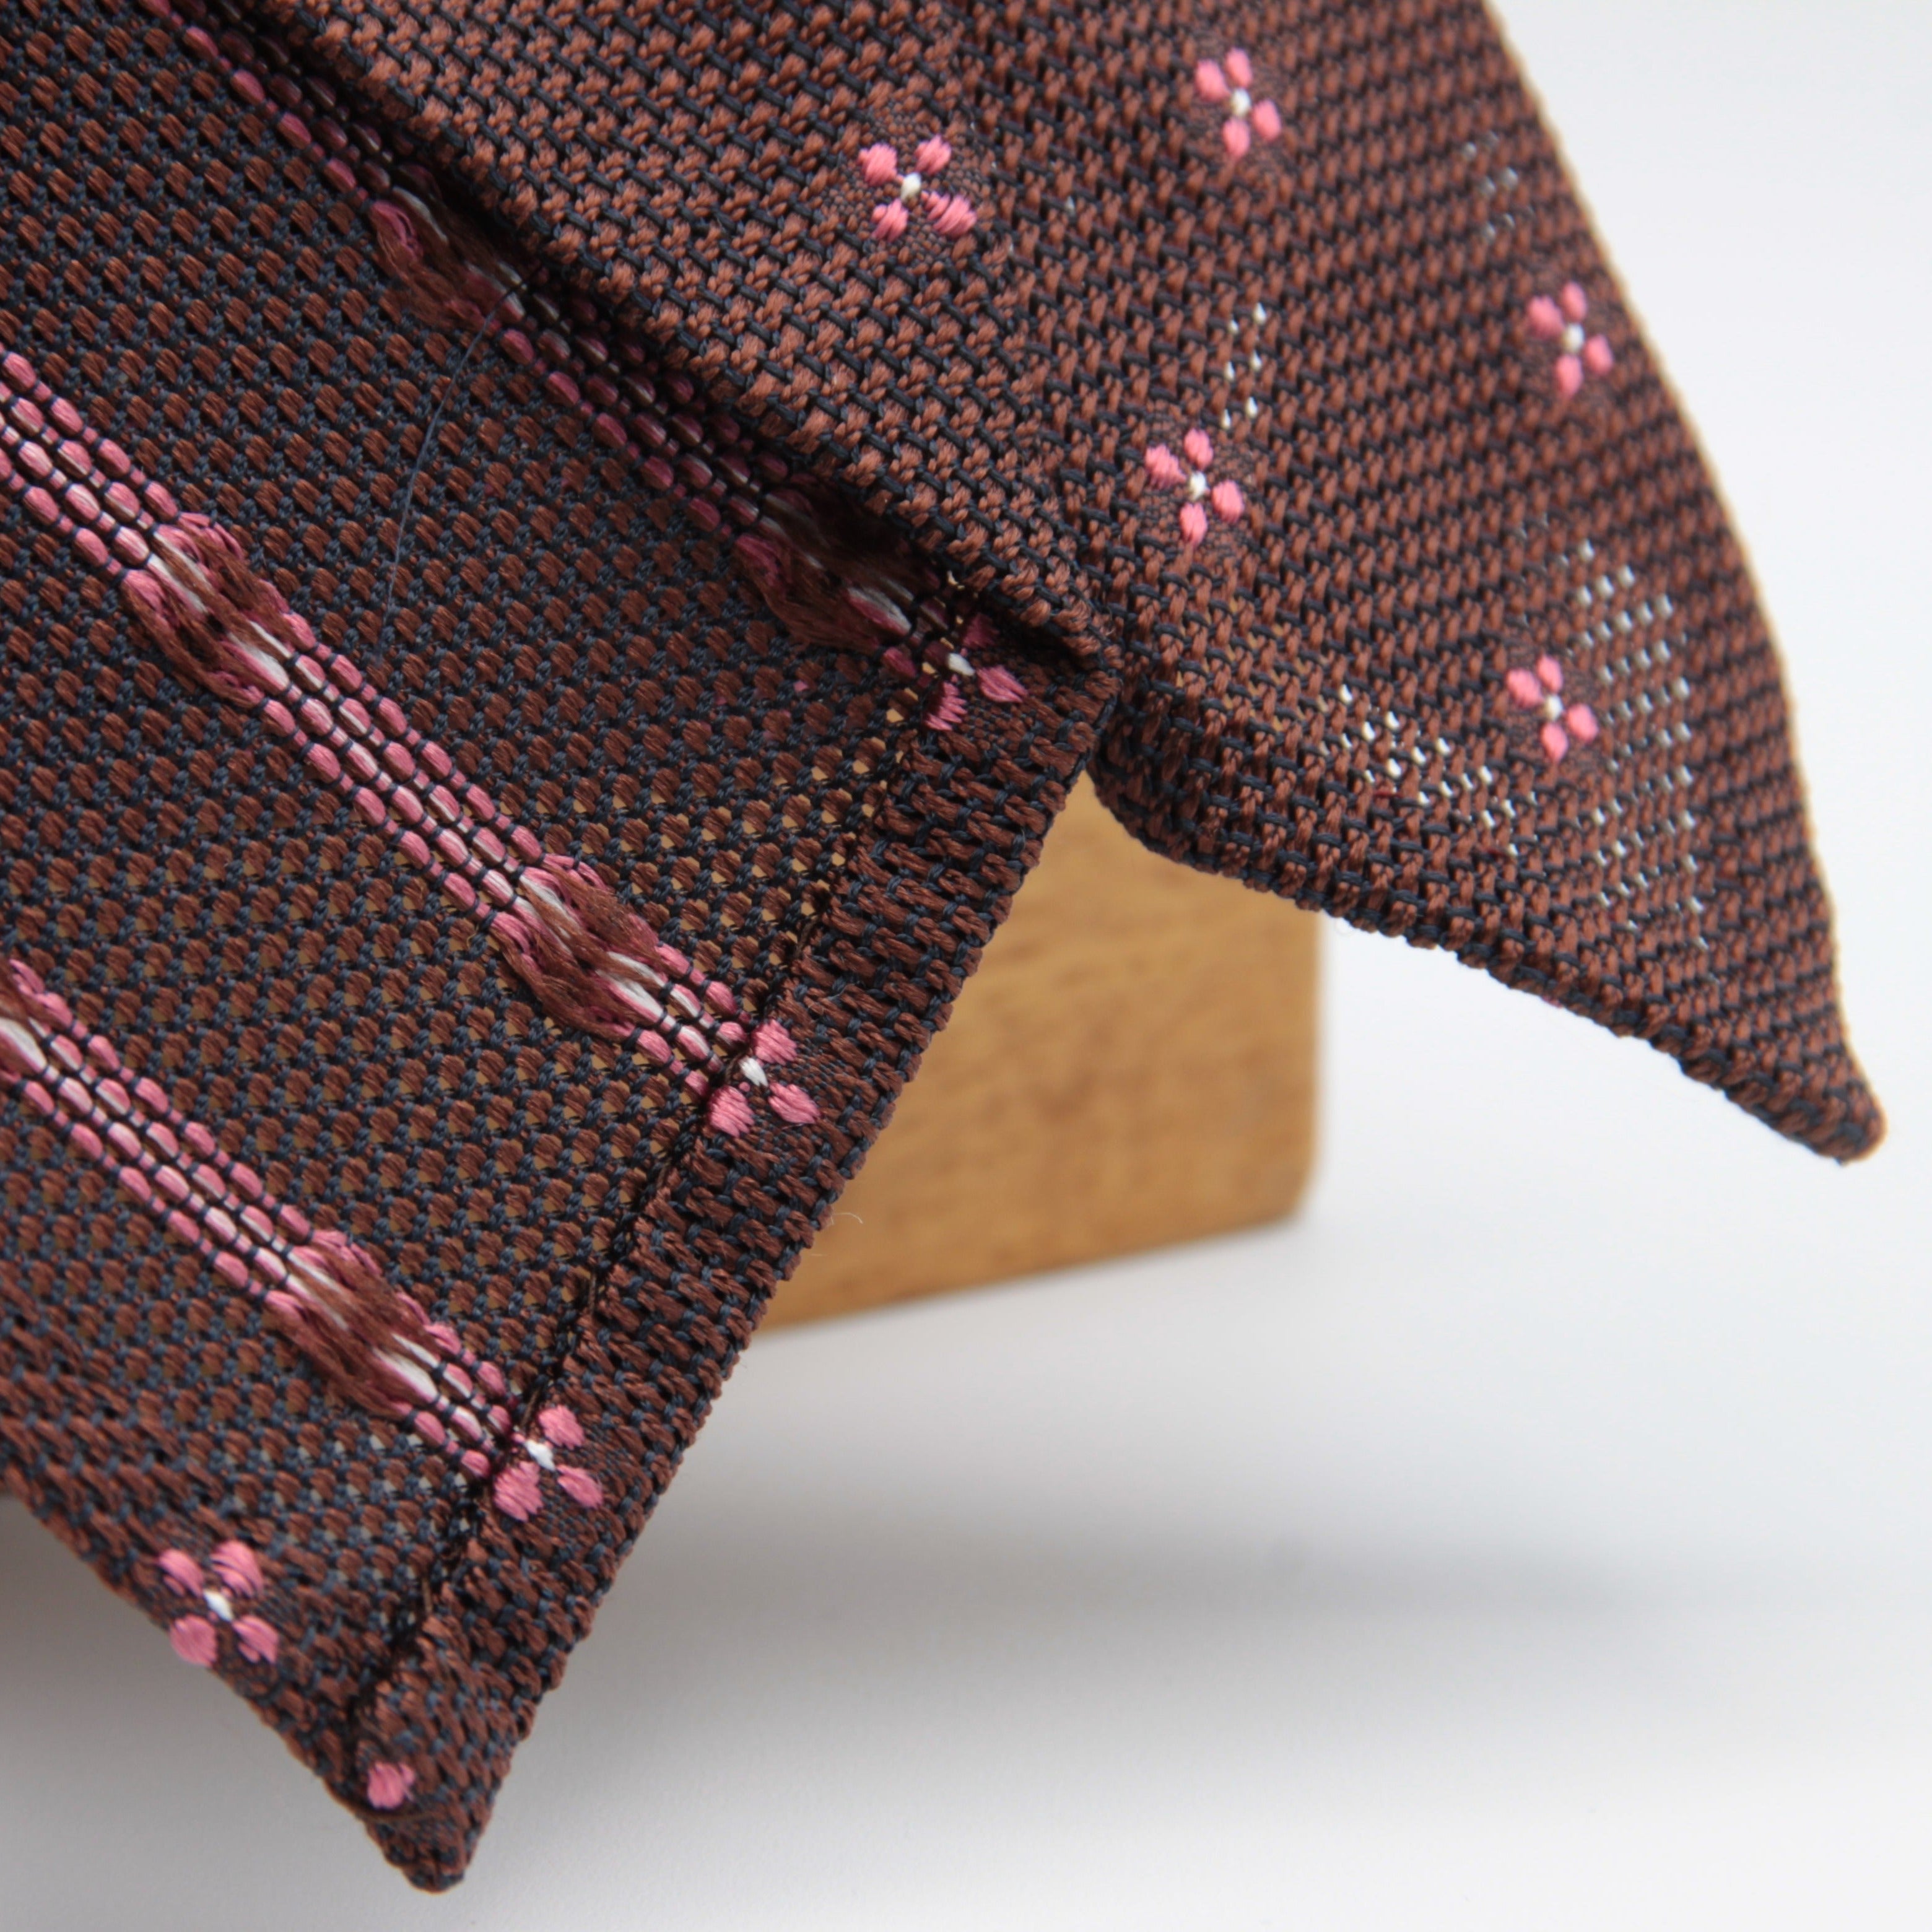 Cruciani & Bella 100% Silk Garza Fina Woven in Italy Unlined Hand rolled blades Brown and Pink Handmade in Italy 8 cm x 150 cm #6193